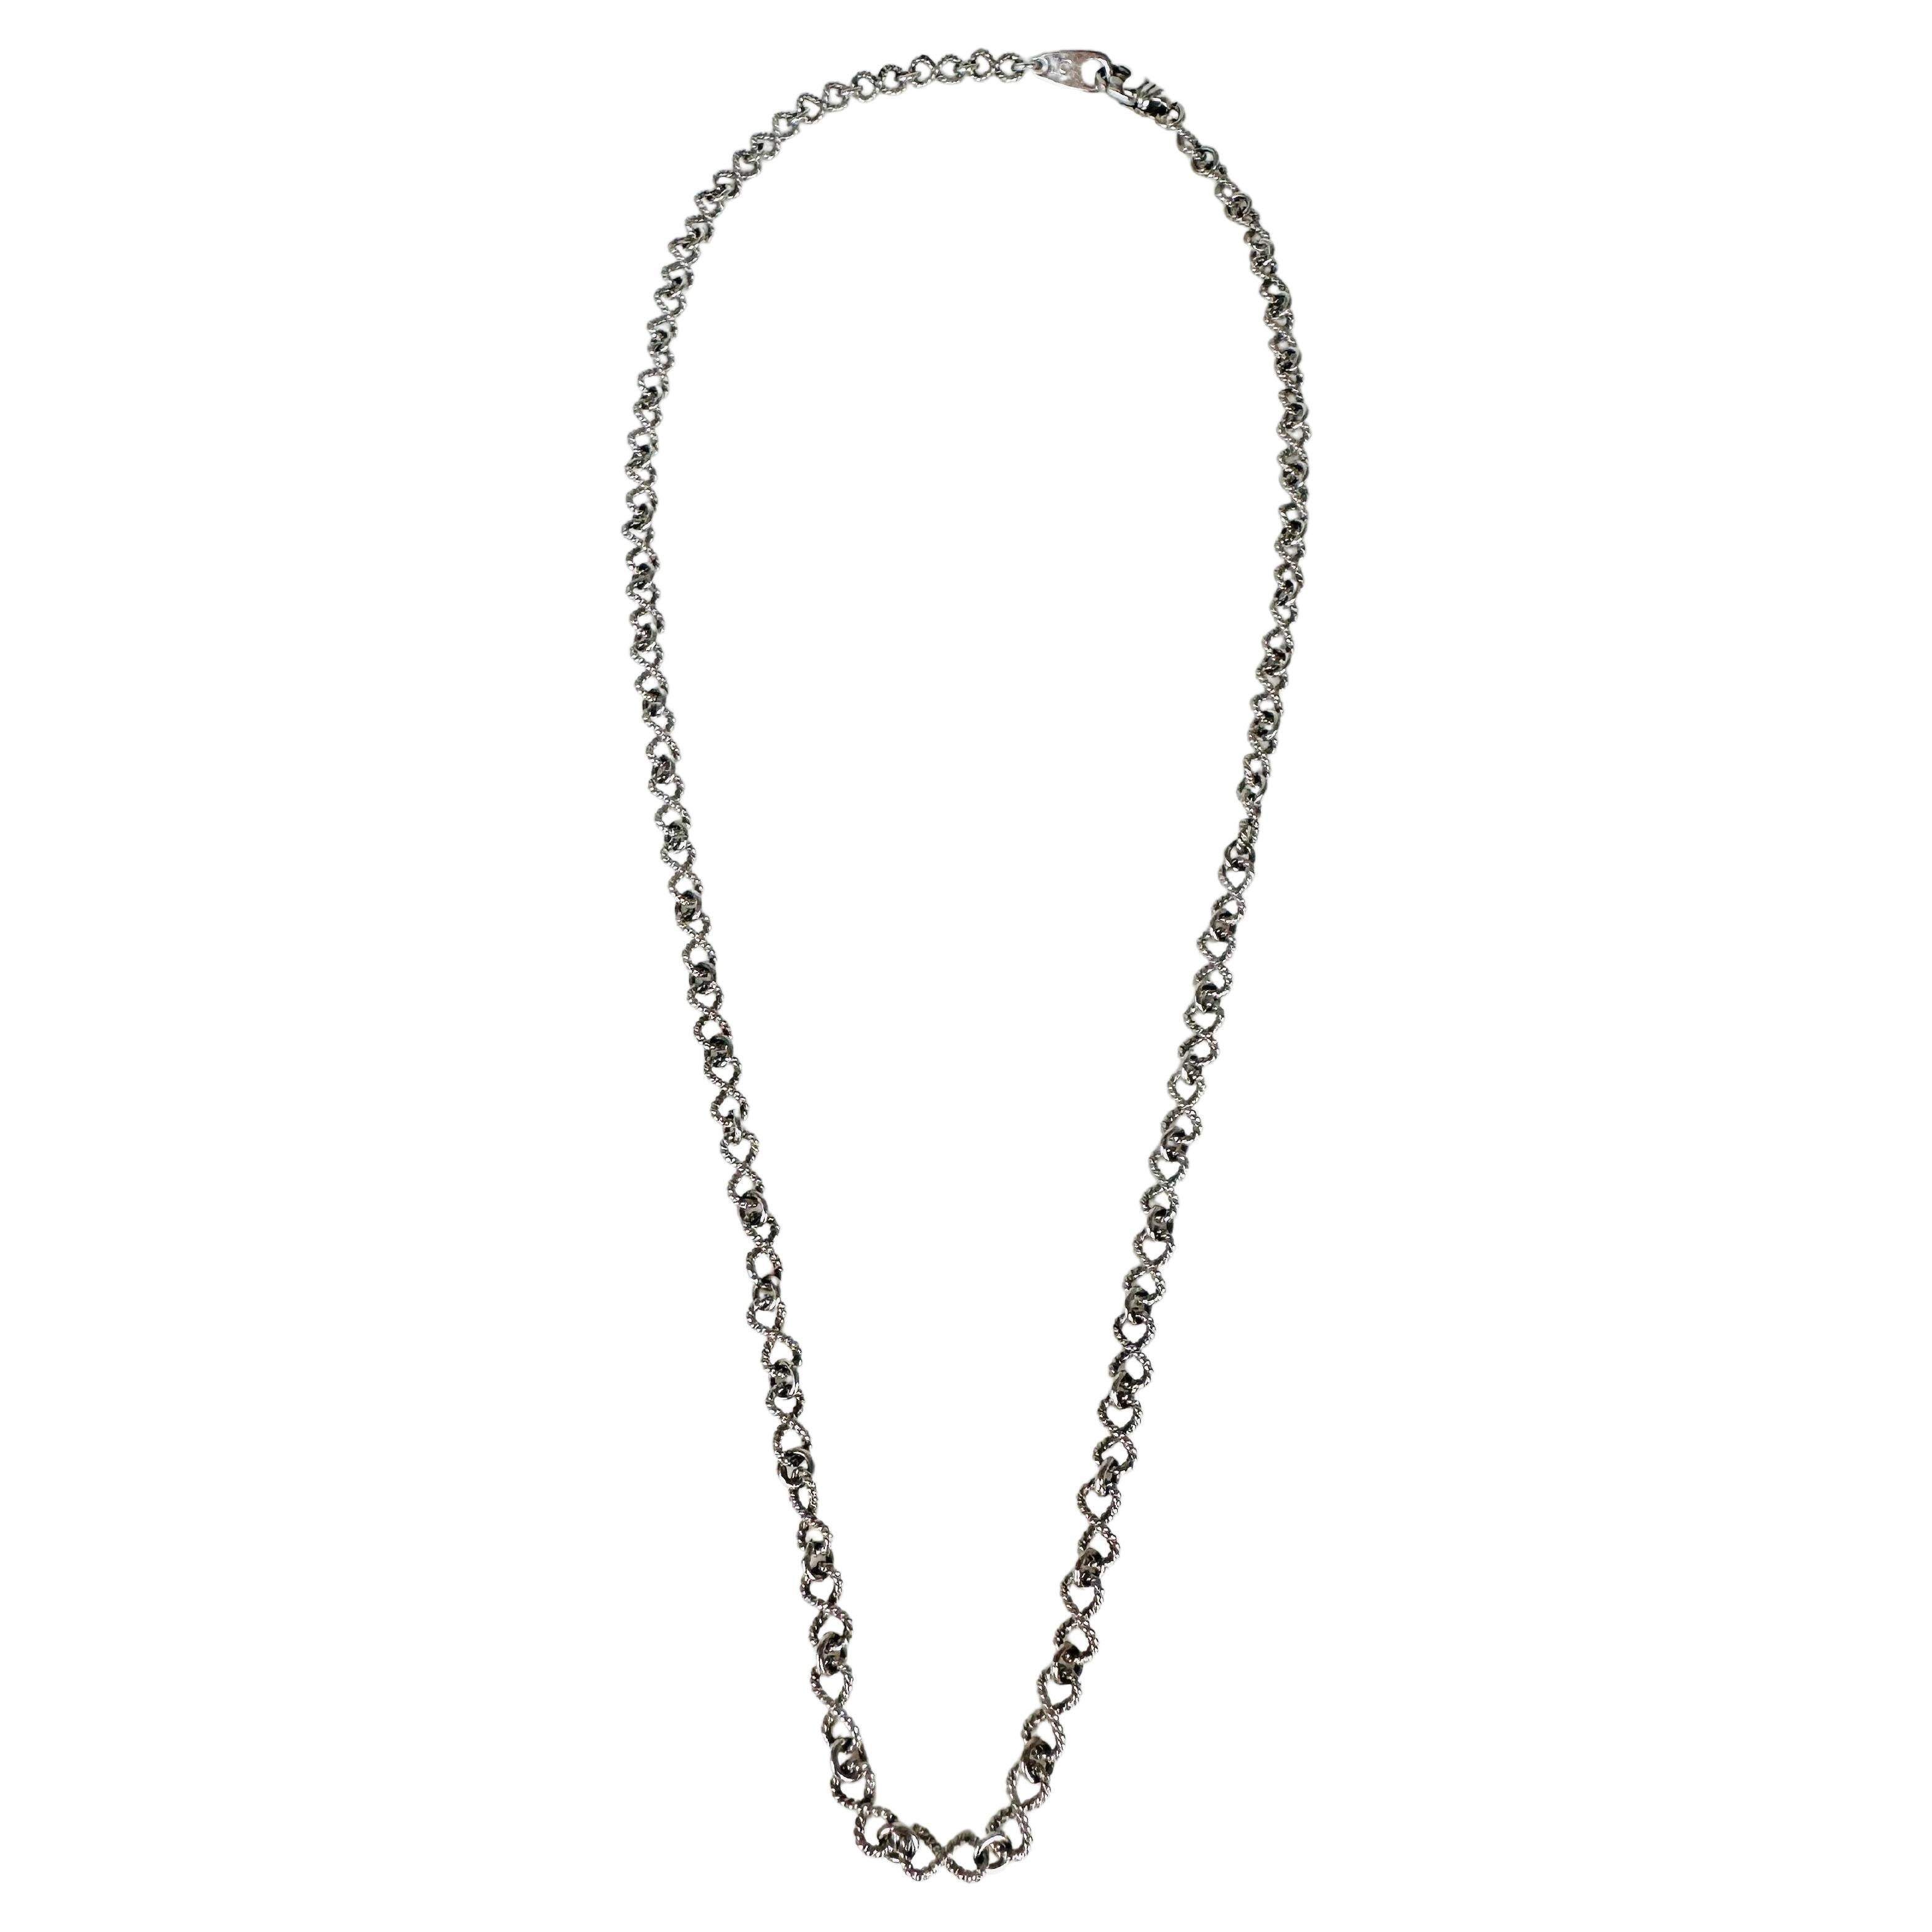 Fancy infinity chain necklace 17" 18KT solid gold chain necklace For Sale